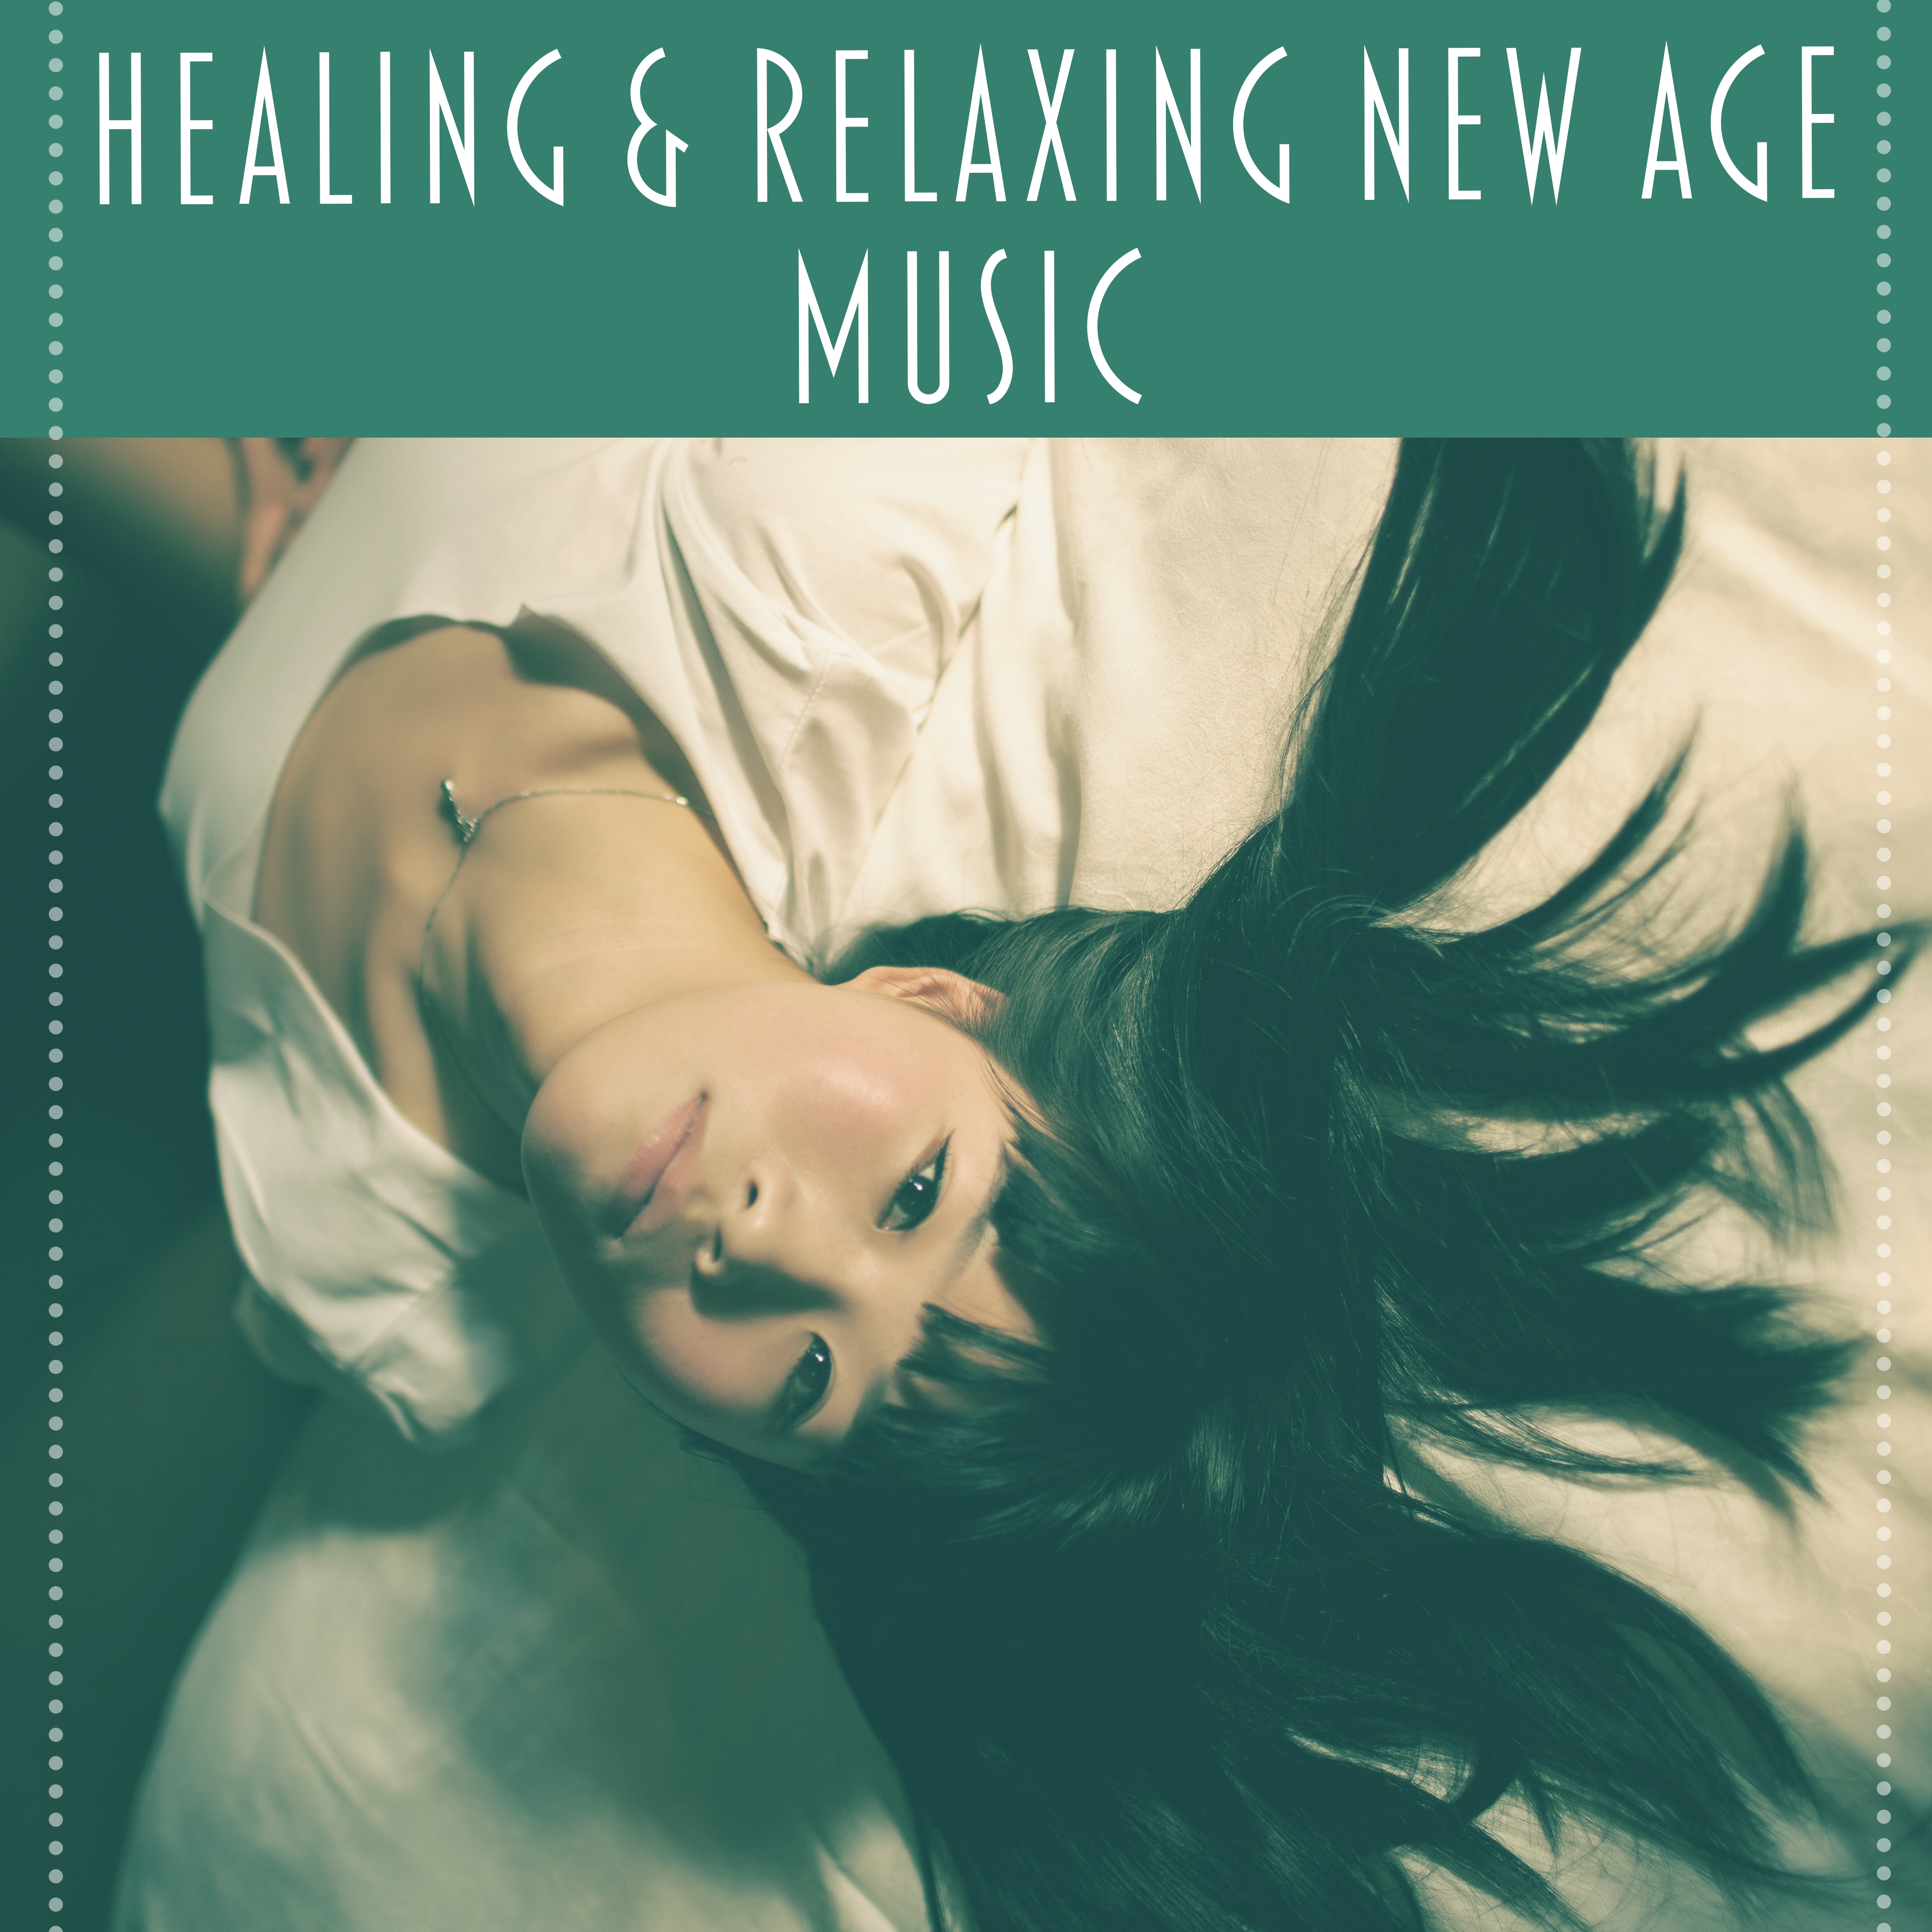 Healing  Relaxing New Age Music  Music to Rest, Healing Therapy, Soft Sounds to Relax, Nature Sounds